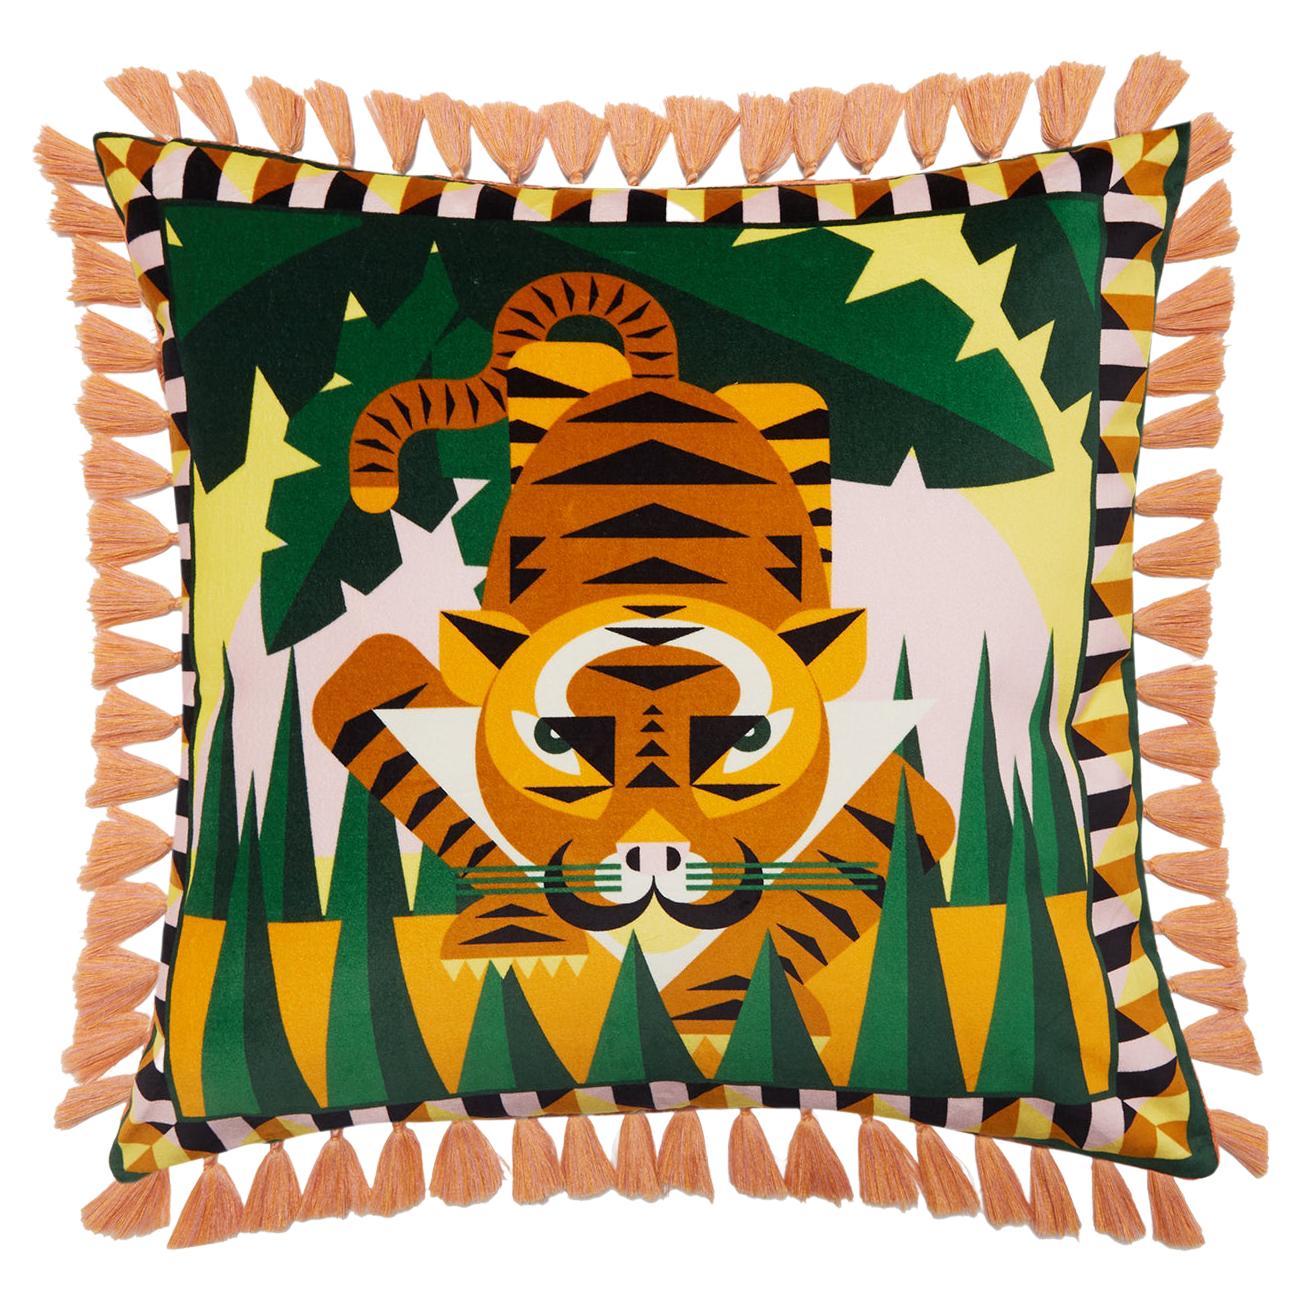 Velvet Cushion with Fringes Tiger, in Cotton, Italy by La DoubleJ